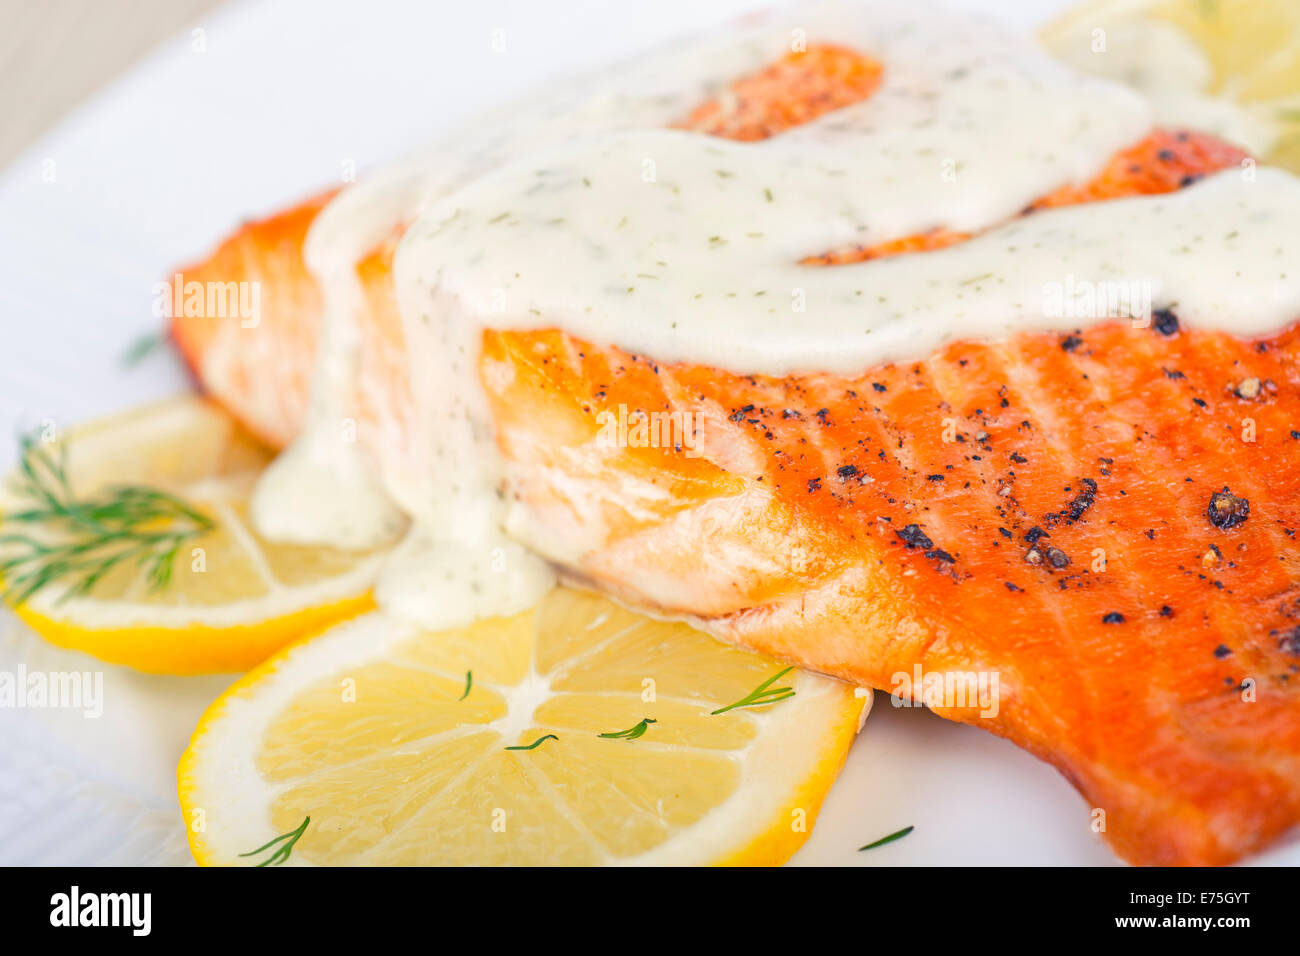 Salmon Fillet with Dill and Lemon Sauce Stock Photo